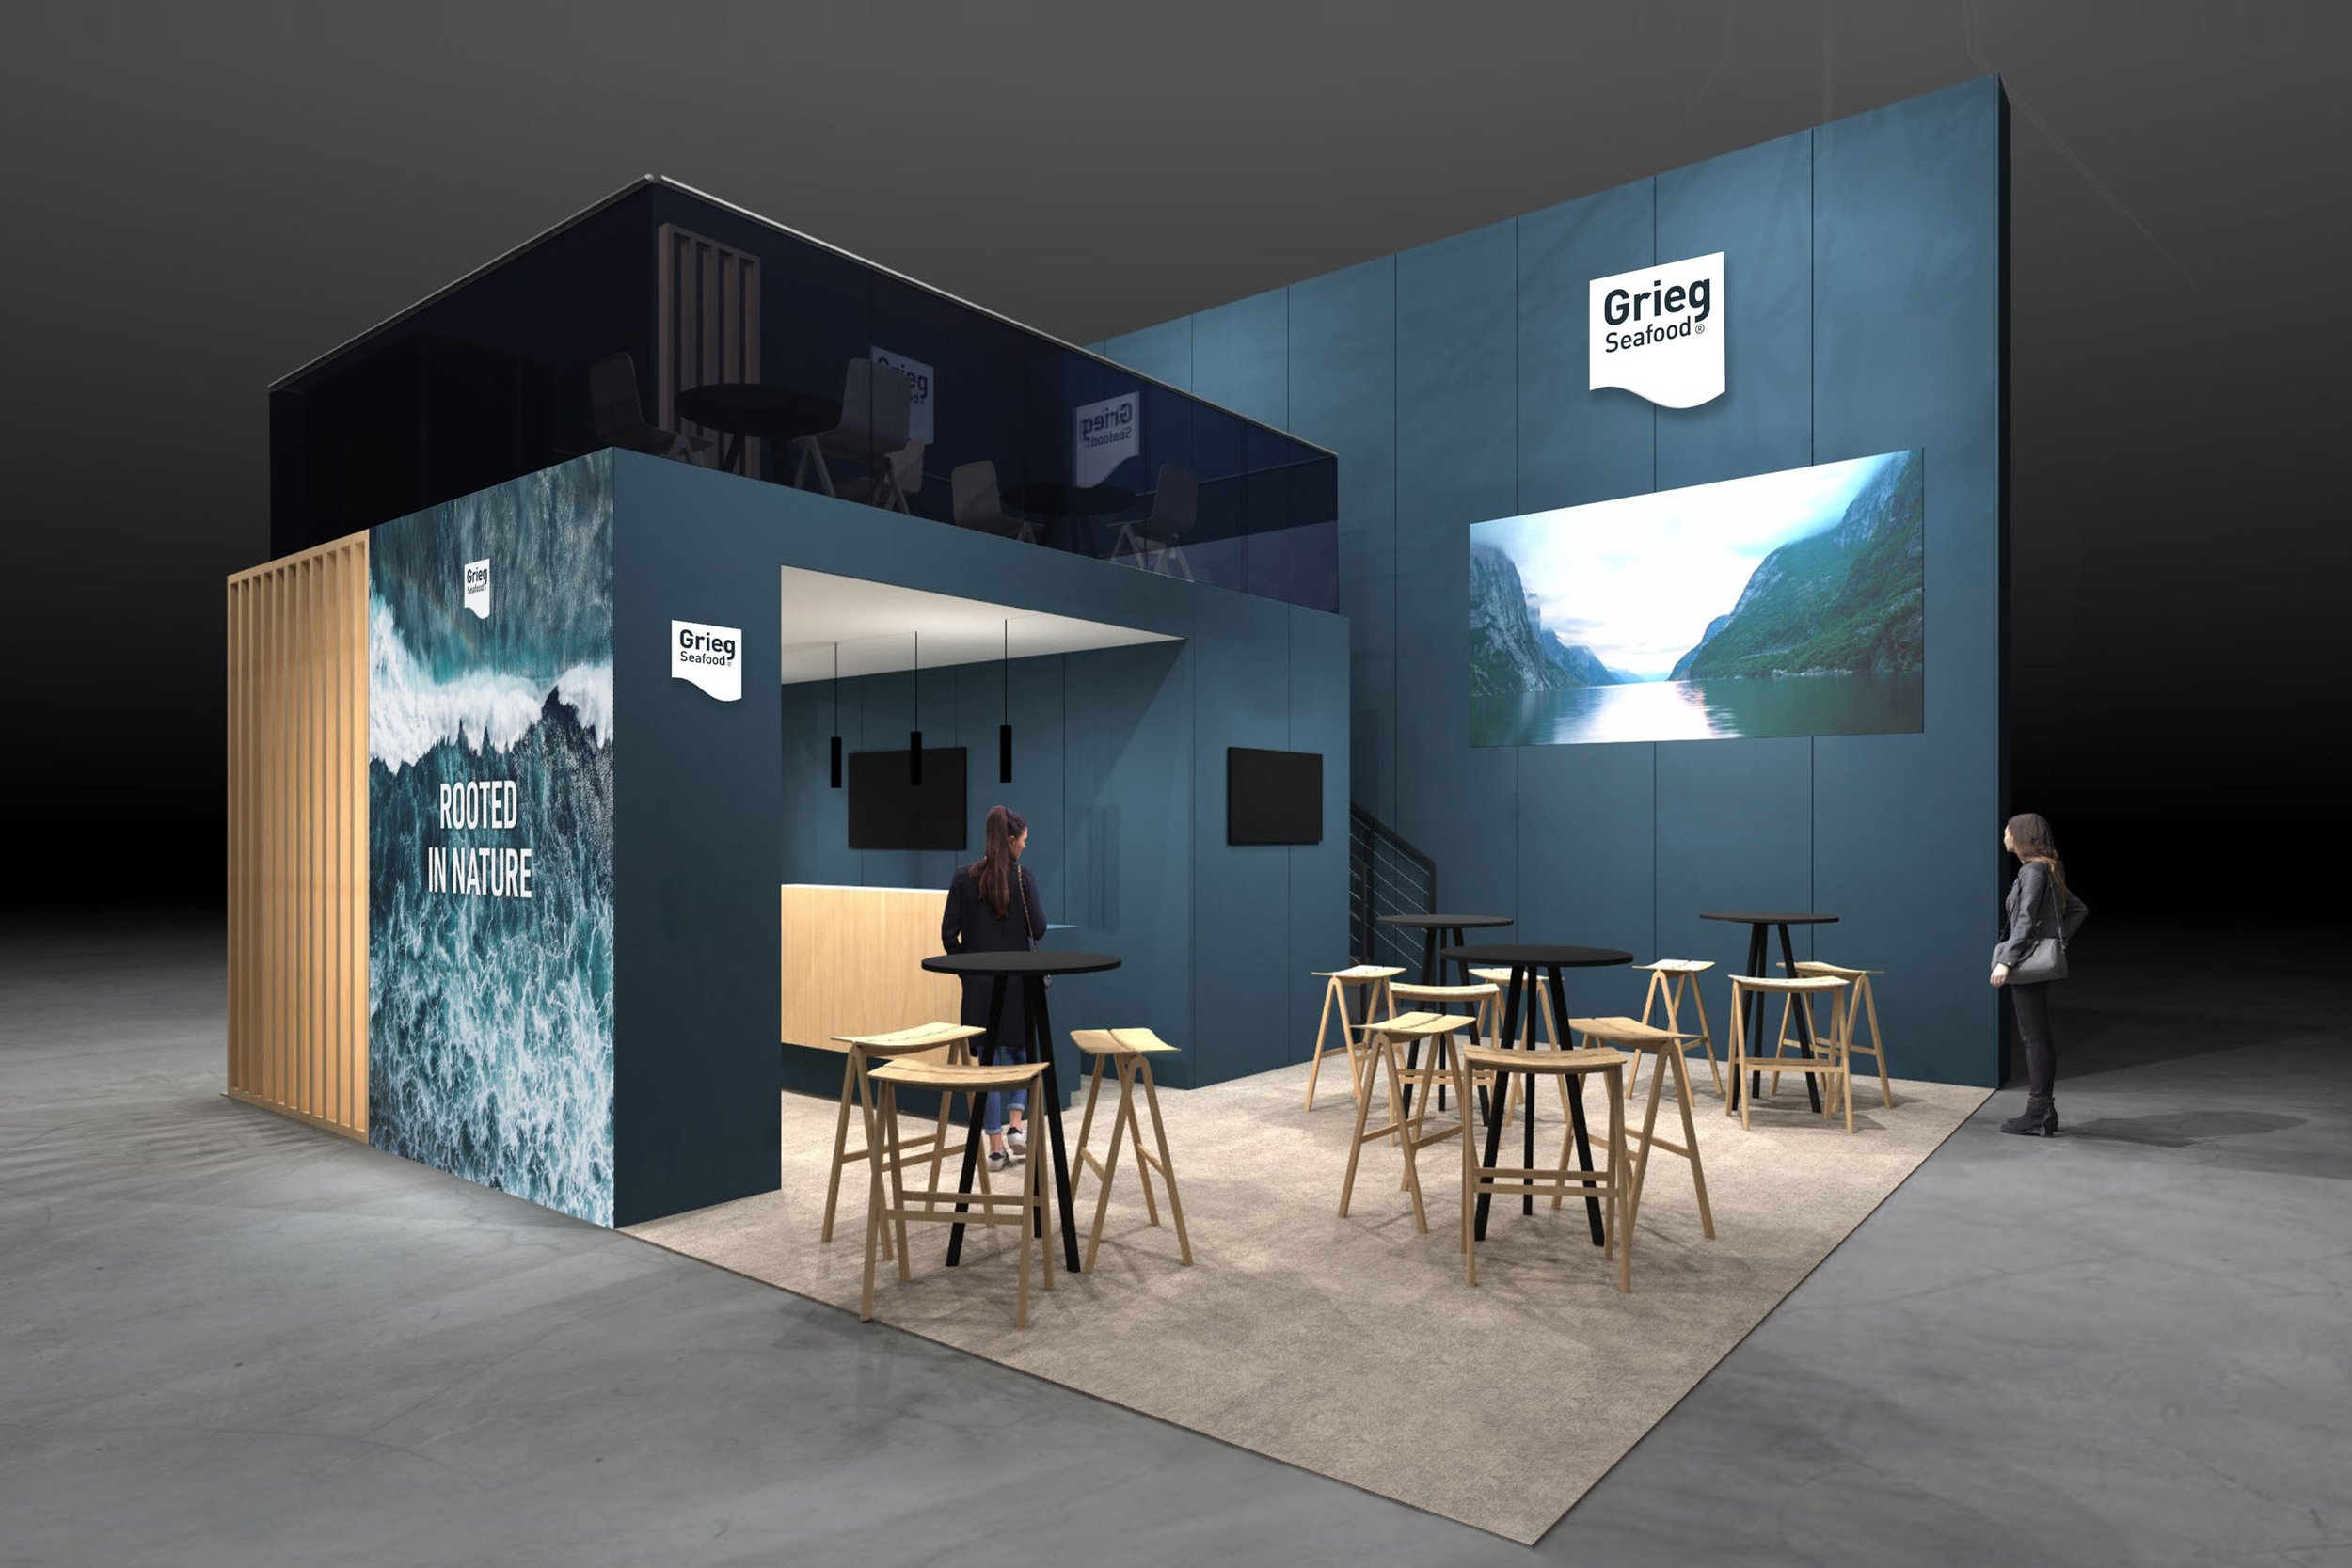 Grieg Seafood – Exhibition Booth